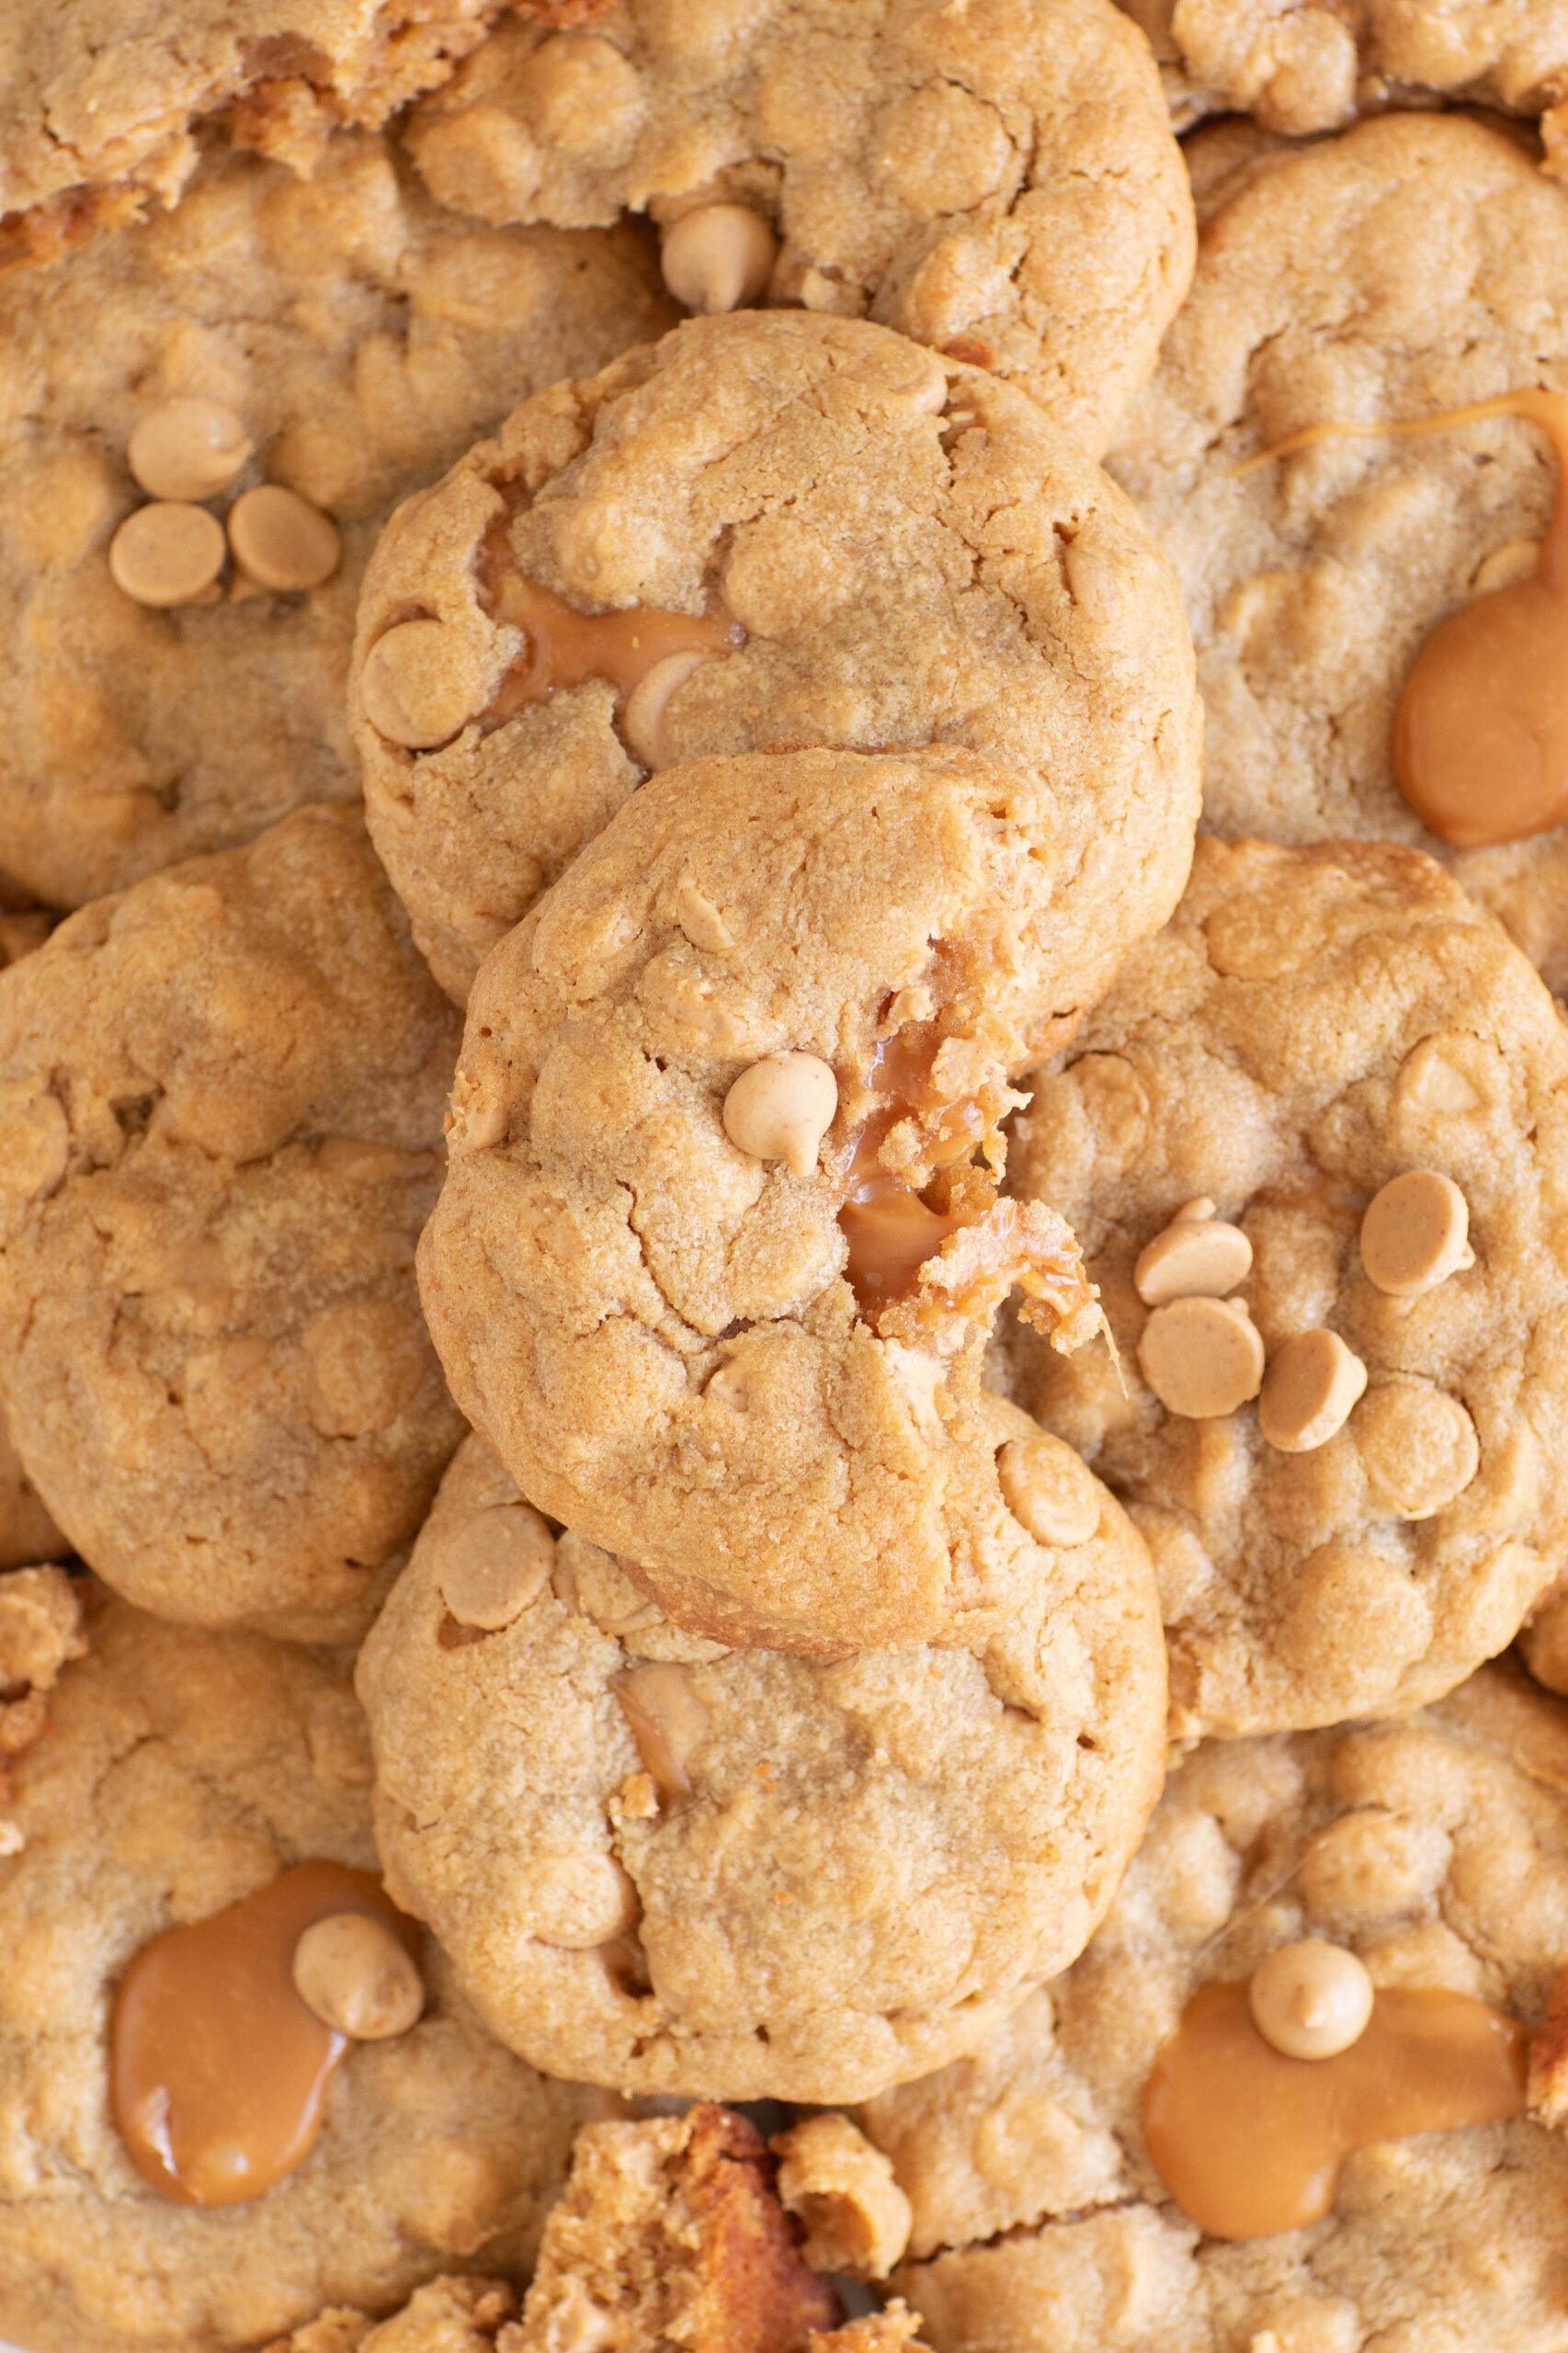 stack of peanut butter cookies stuffed with caramel. halved cookie revealing gooey caramel in the center